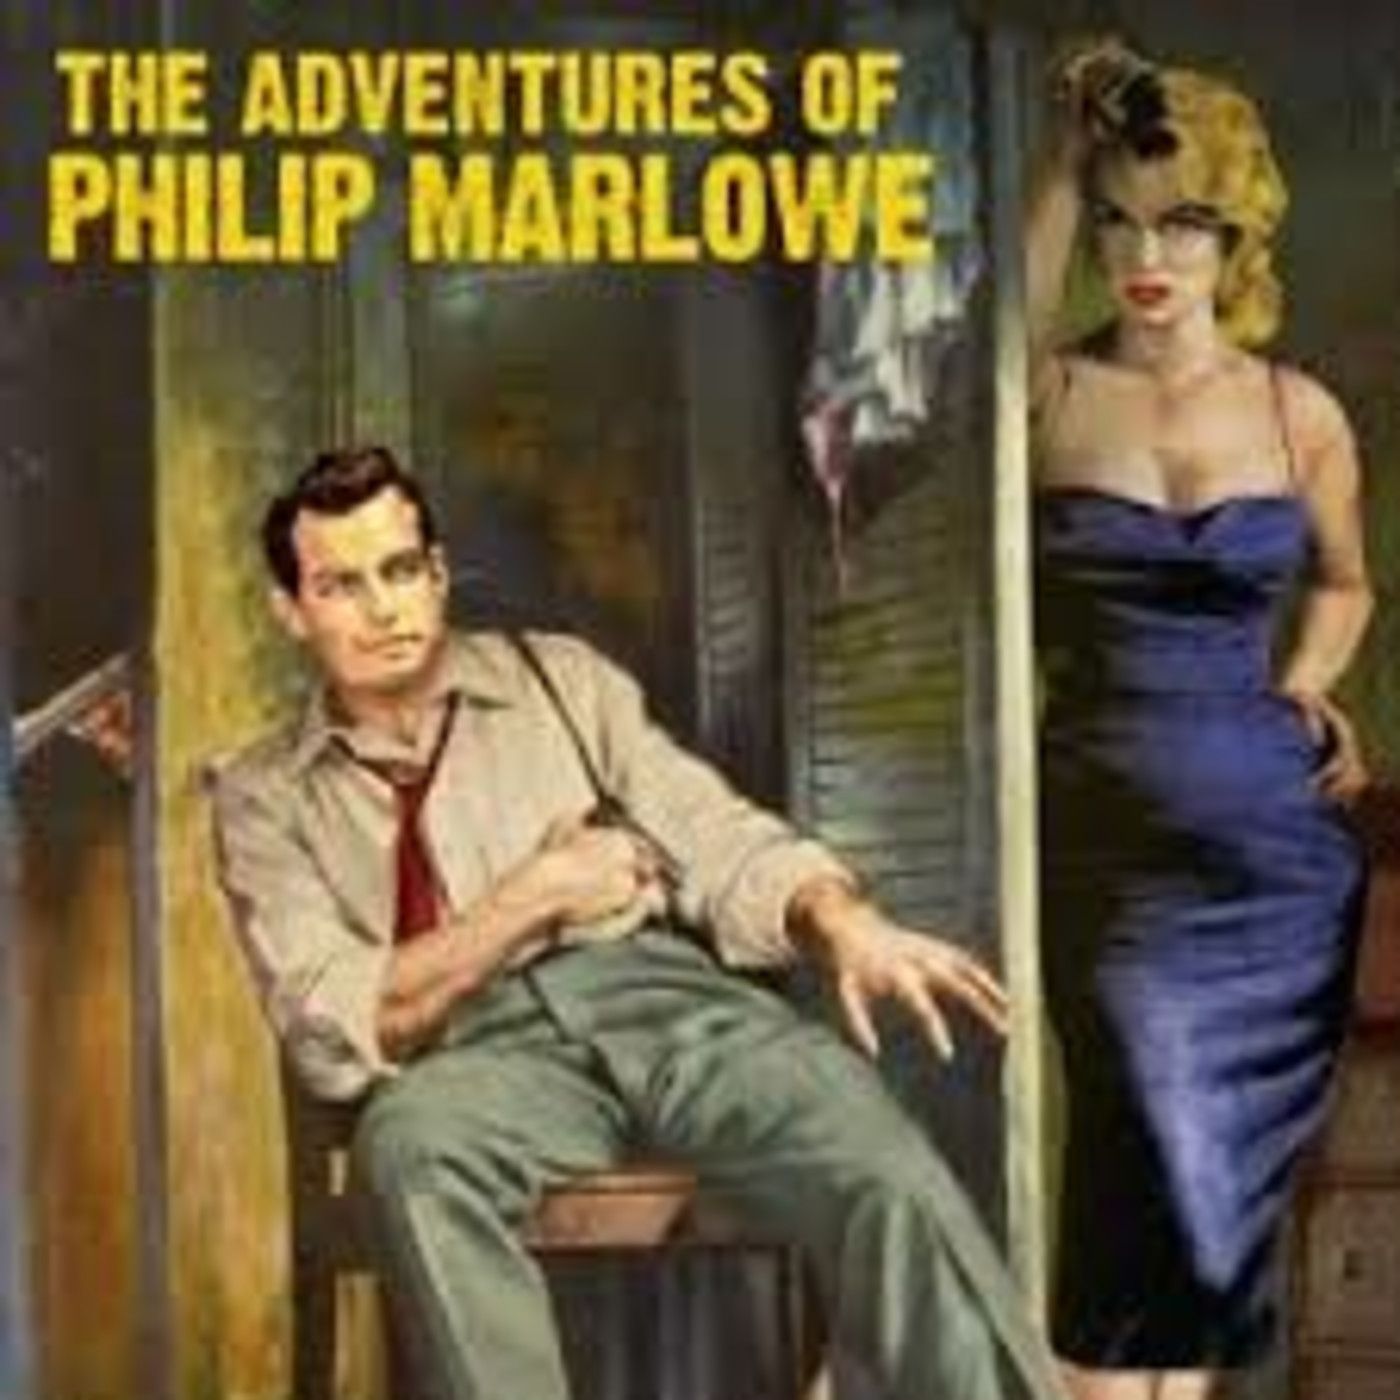 The Adventures of Philip Marlowe - The Big Book